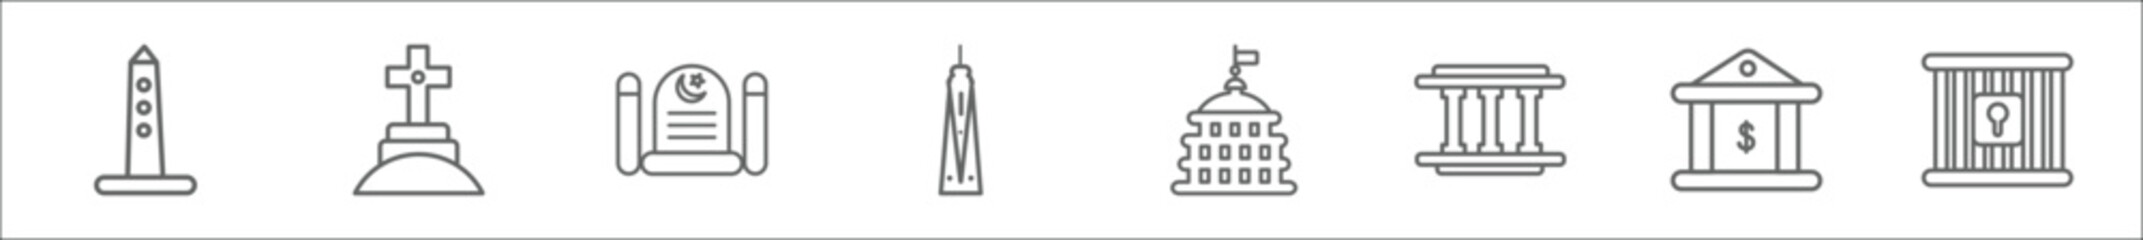 outline set of buildings line icons. linear vector icons such as washington monument, christian cemetery, islamic cemetery, trade center, goverment building, lincoln memorial, reserve bank, prison